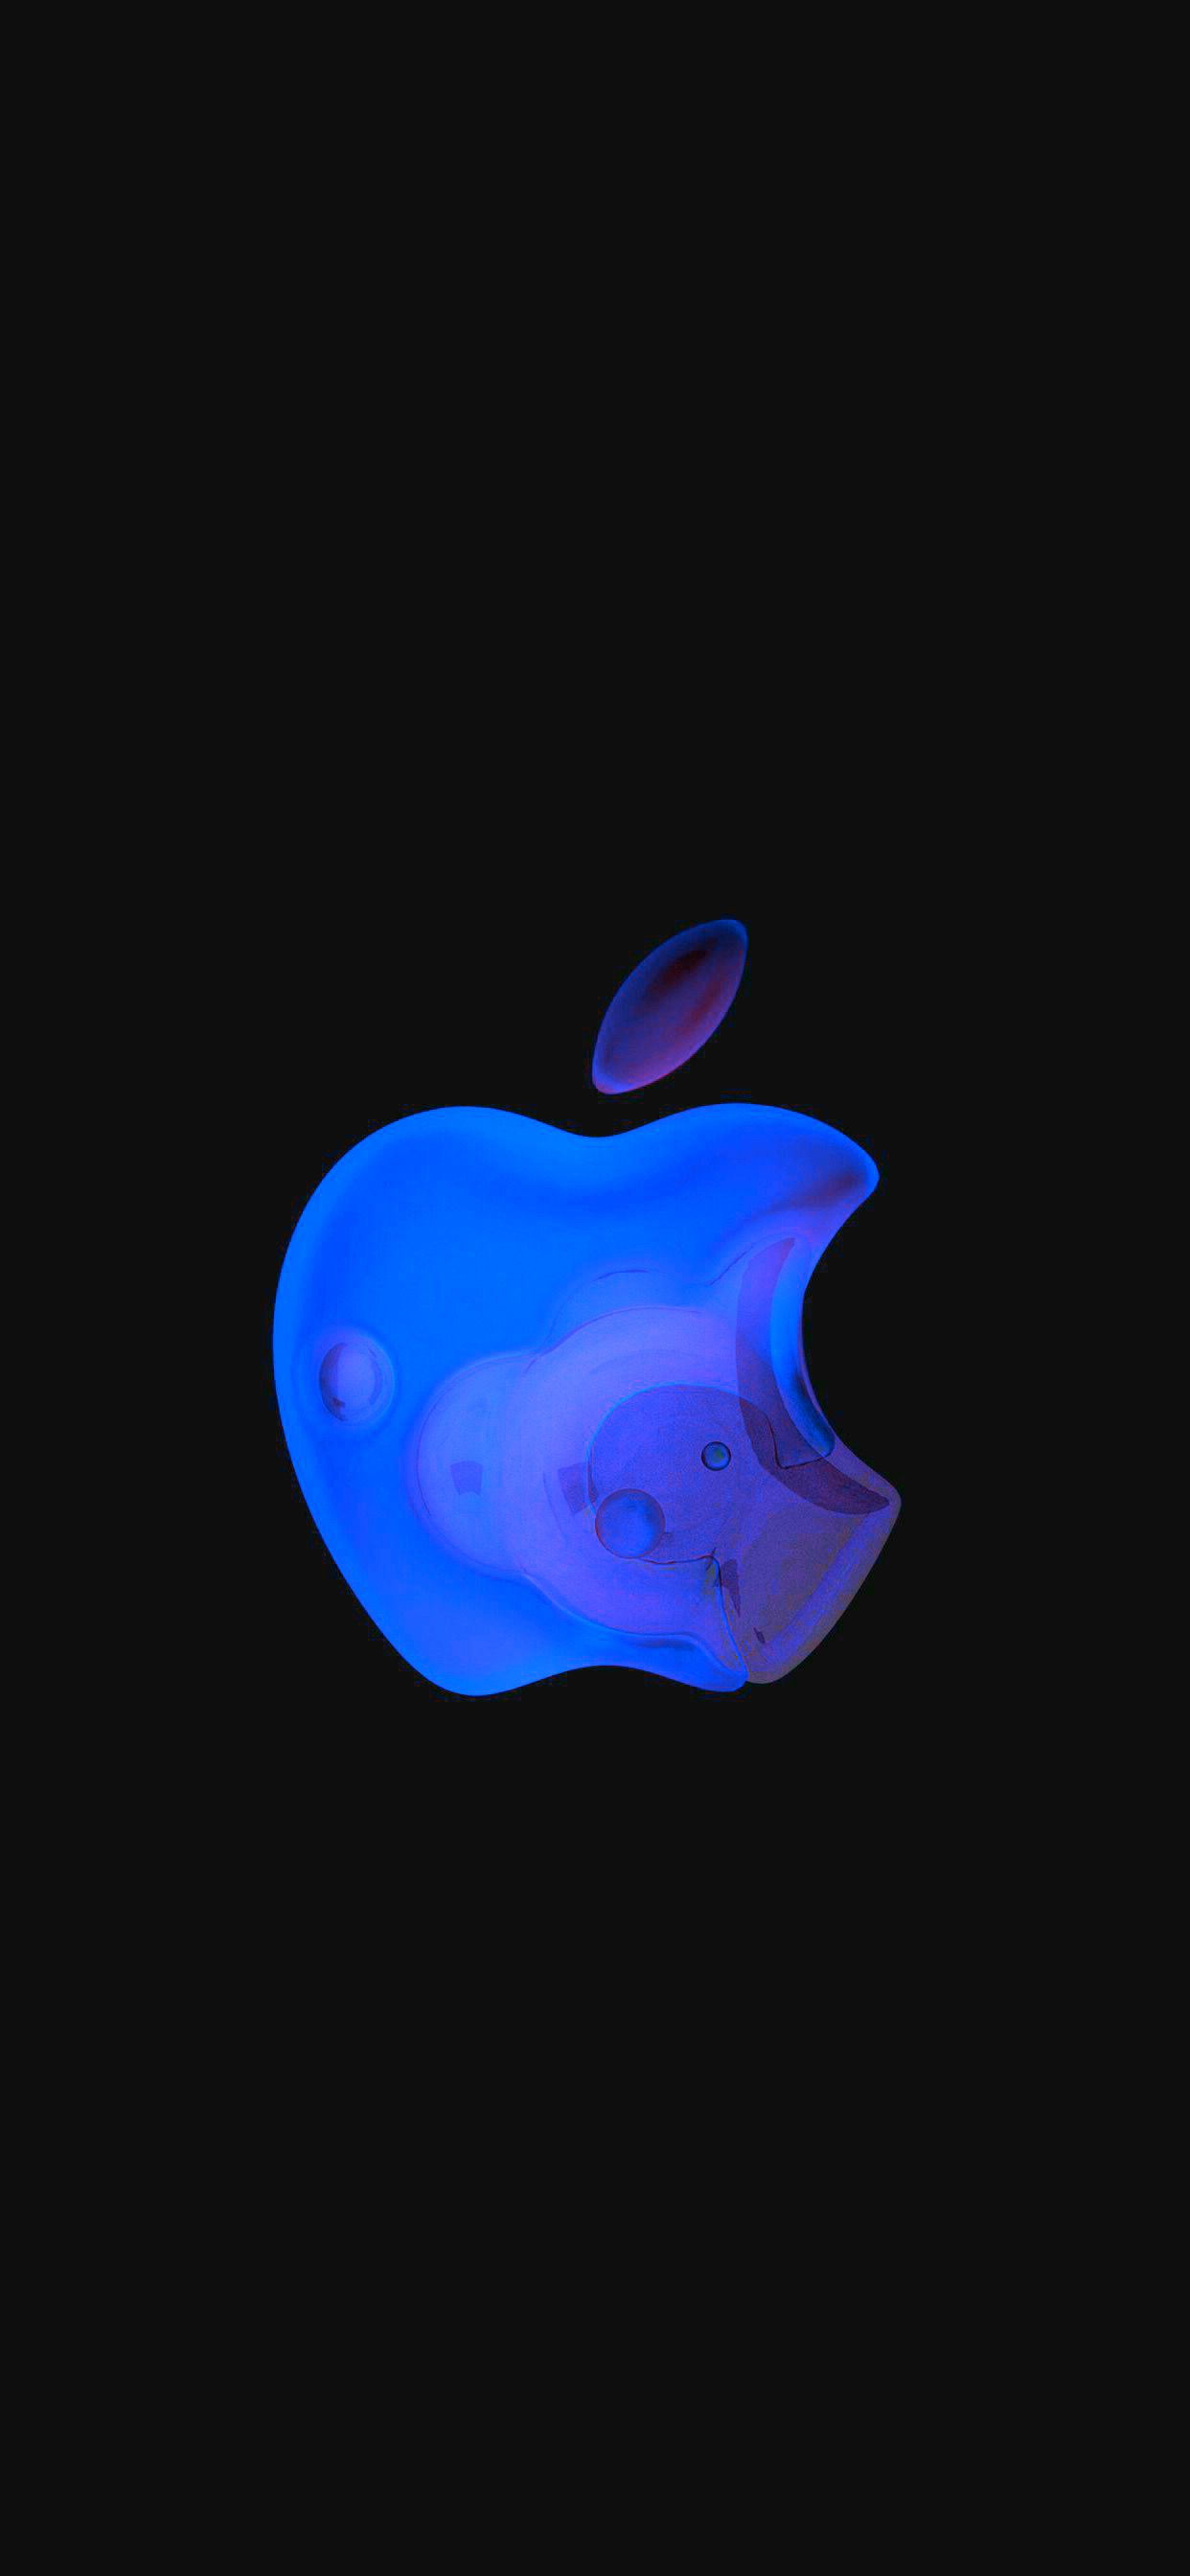 Apple Logo Iphone 11 Pro Max Wallpapers Wallpaper Cave